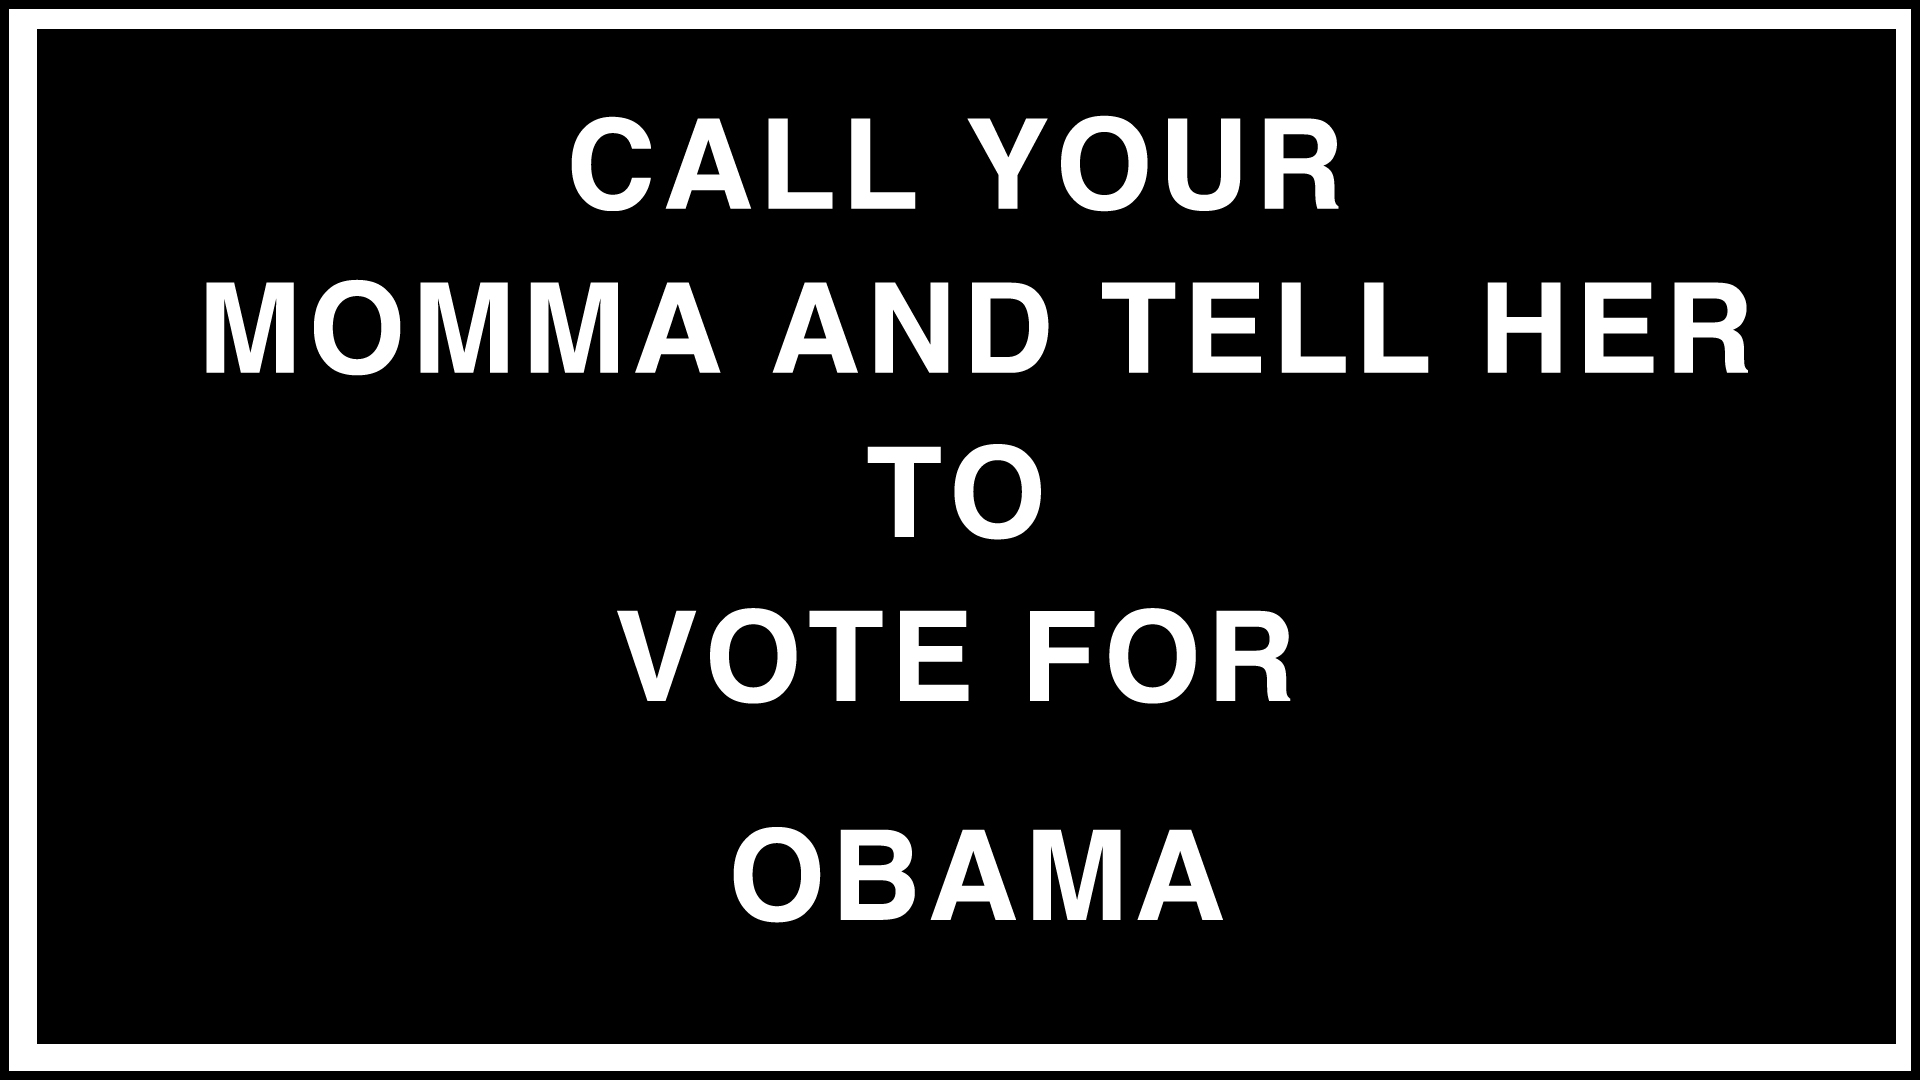 CALL YOUR MOMMA AND TELL HER TO VOTE FOR OBAMA